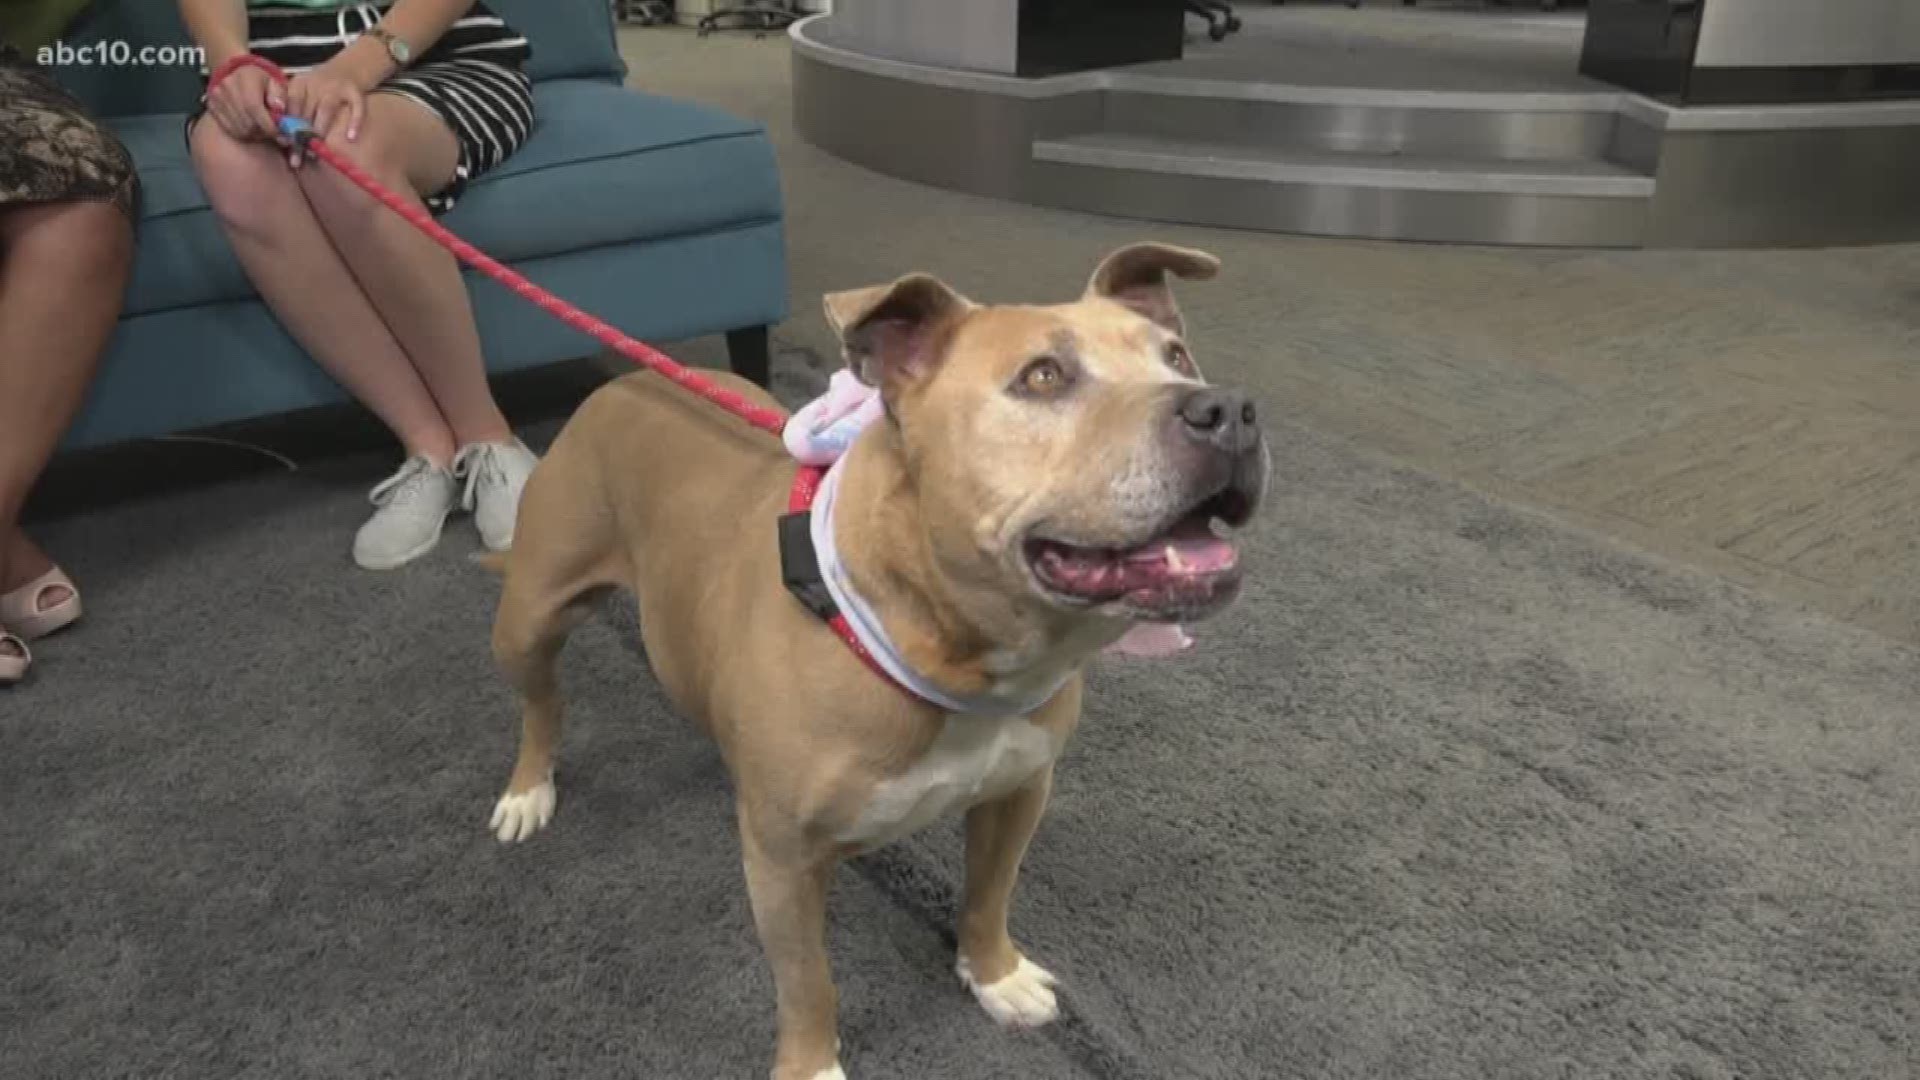 This 7-year-old Pit Bull Terrier is described as sweet and gentle. She would do great with a family with children. She's available at the Stockton Animal Shelter.